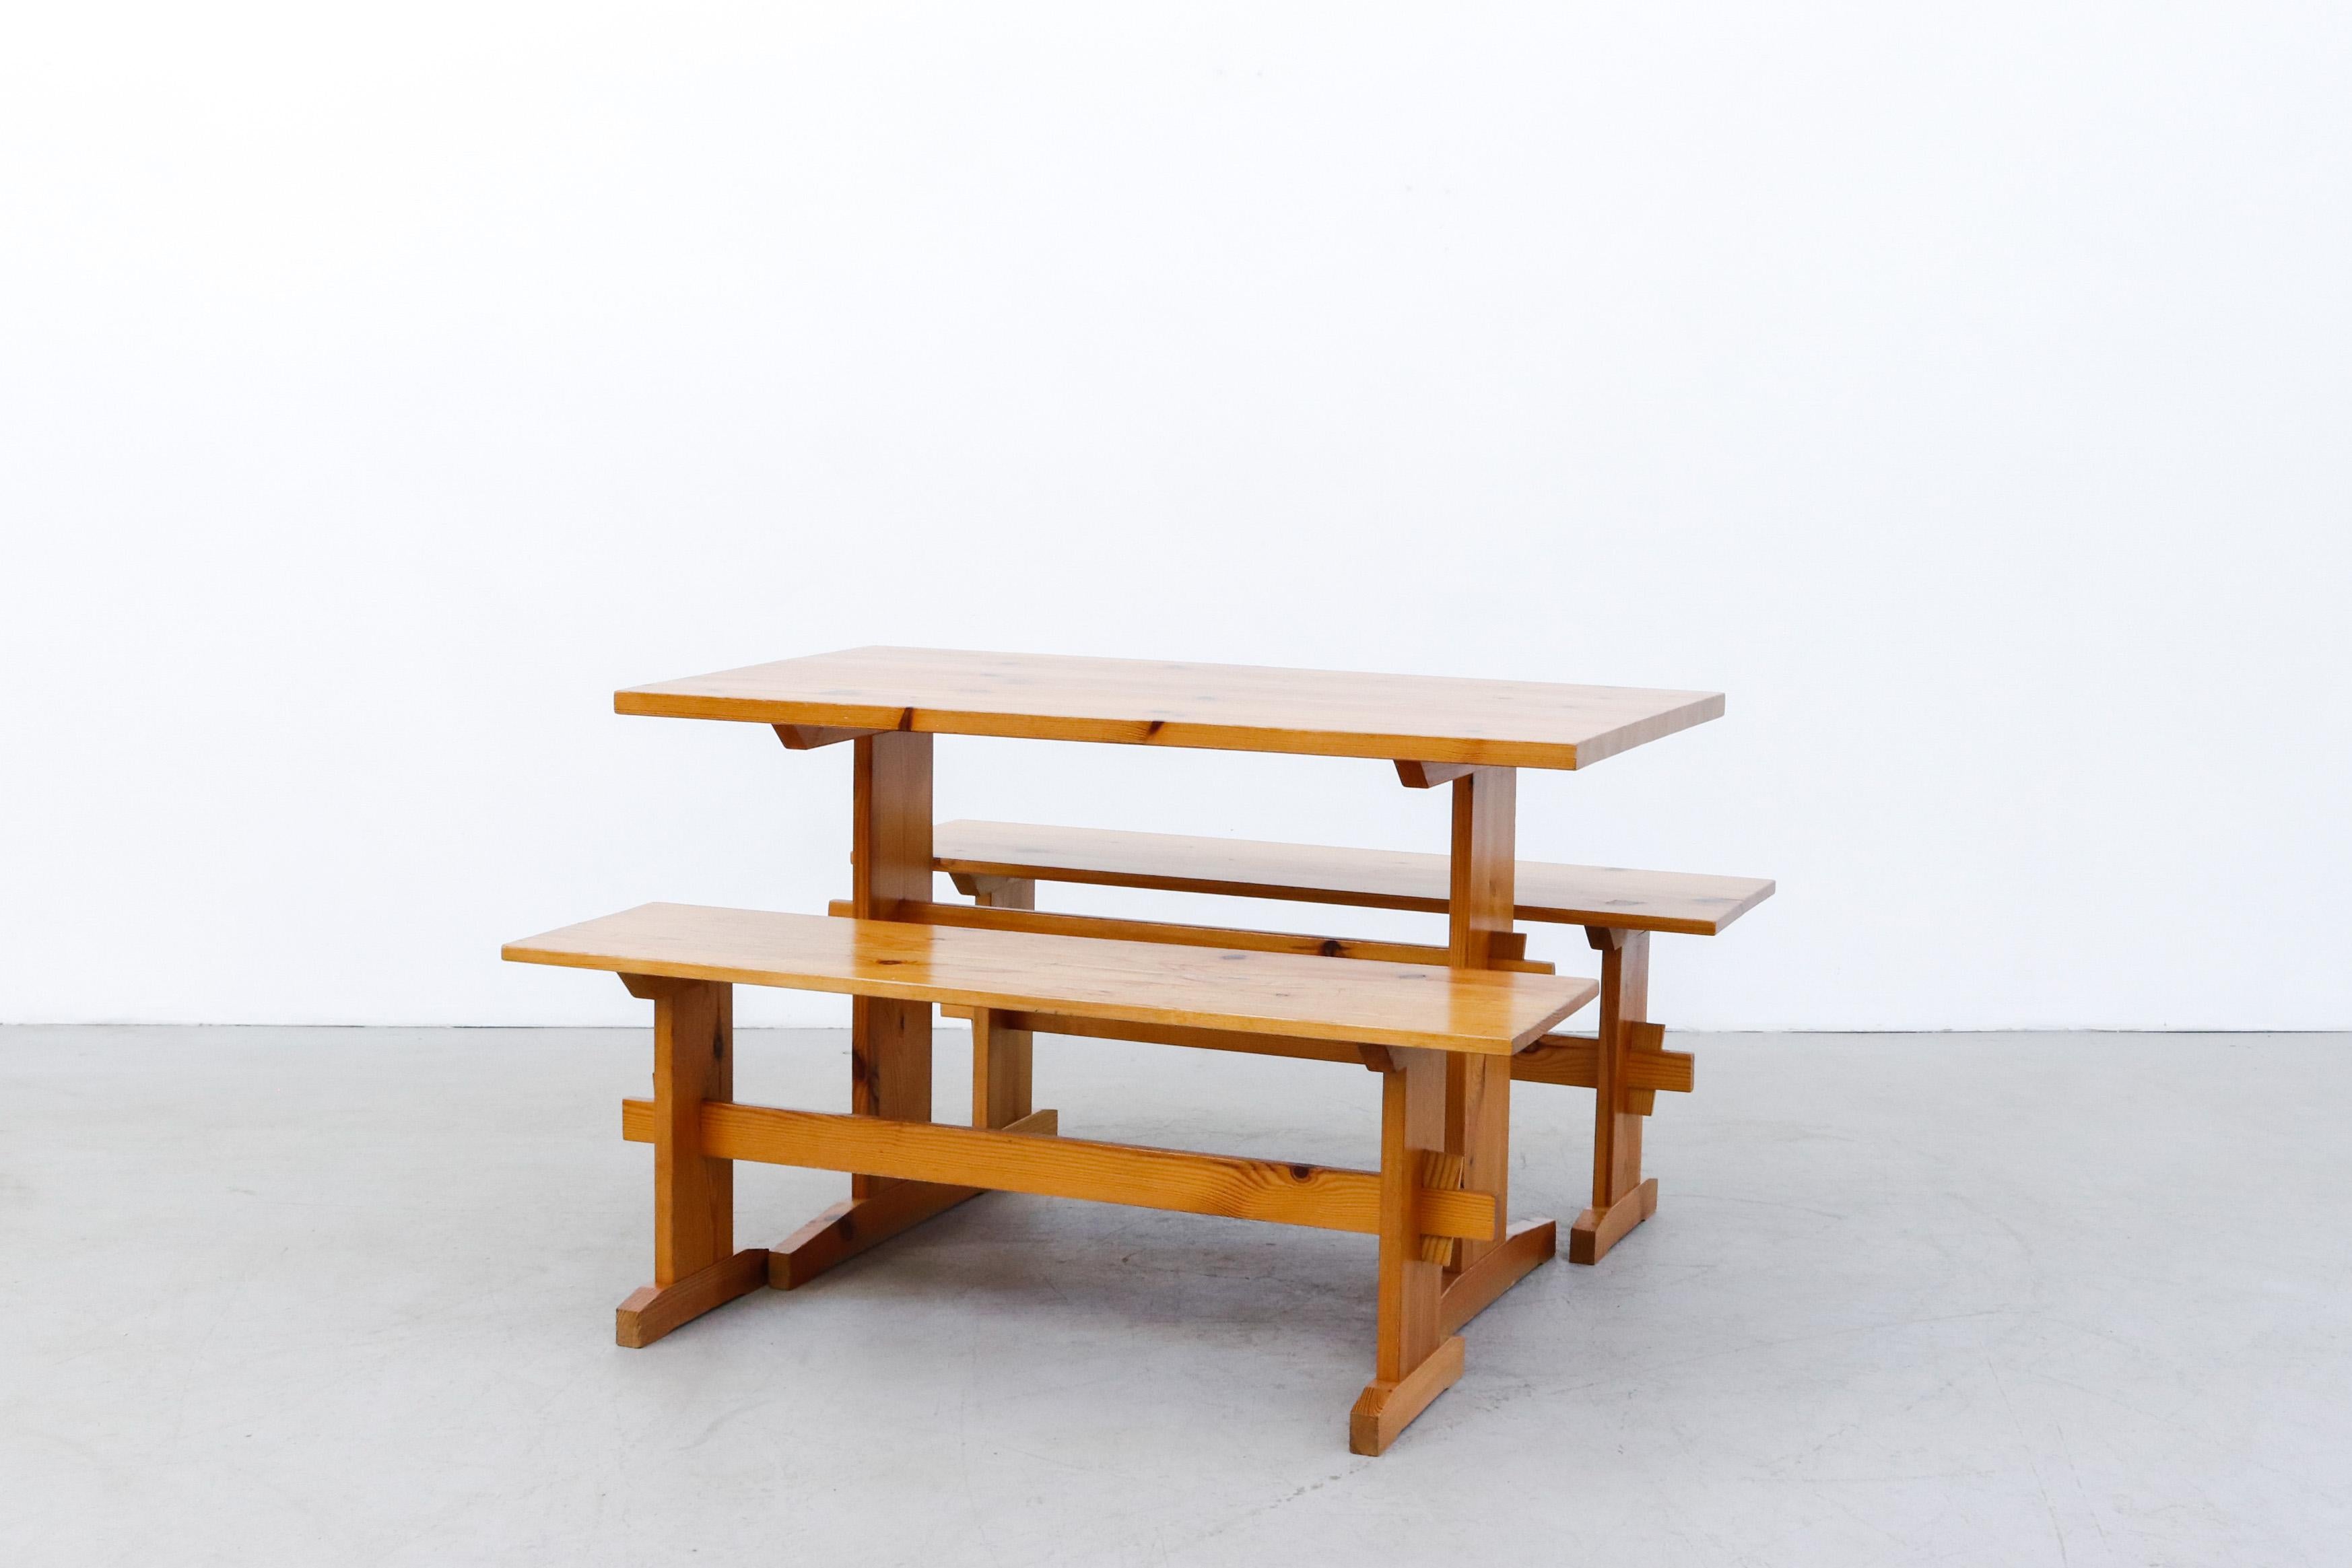 Petitie Børge Mogensen style dining table and bench set with peg tension assembly. Lightly refinished pine with visible wear including some scratching. Wear is consistent with it's age and use. Benches measure 47.25 x 13 x 18.25. Set price. Another